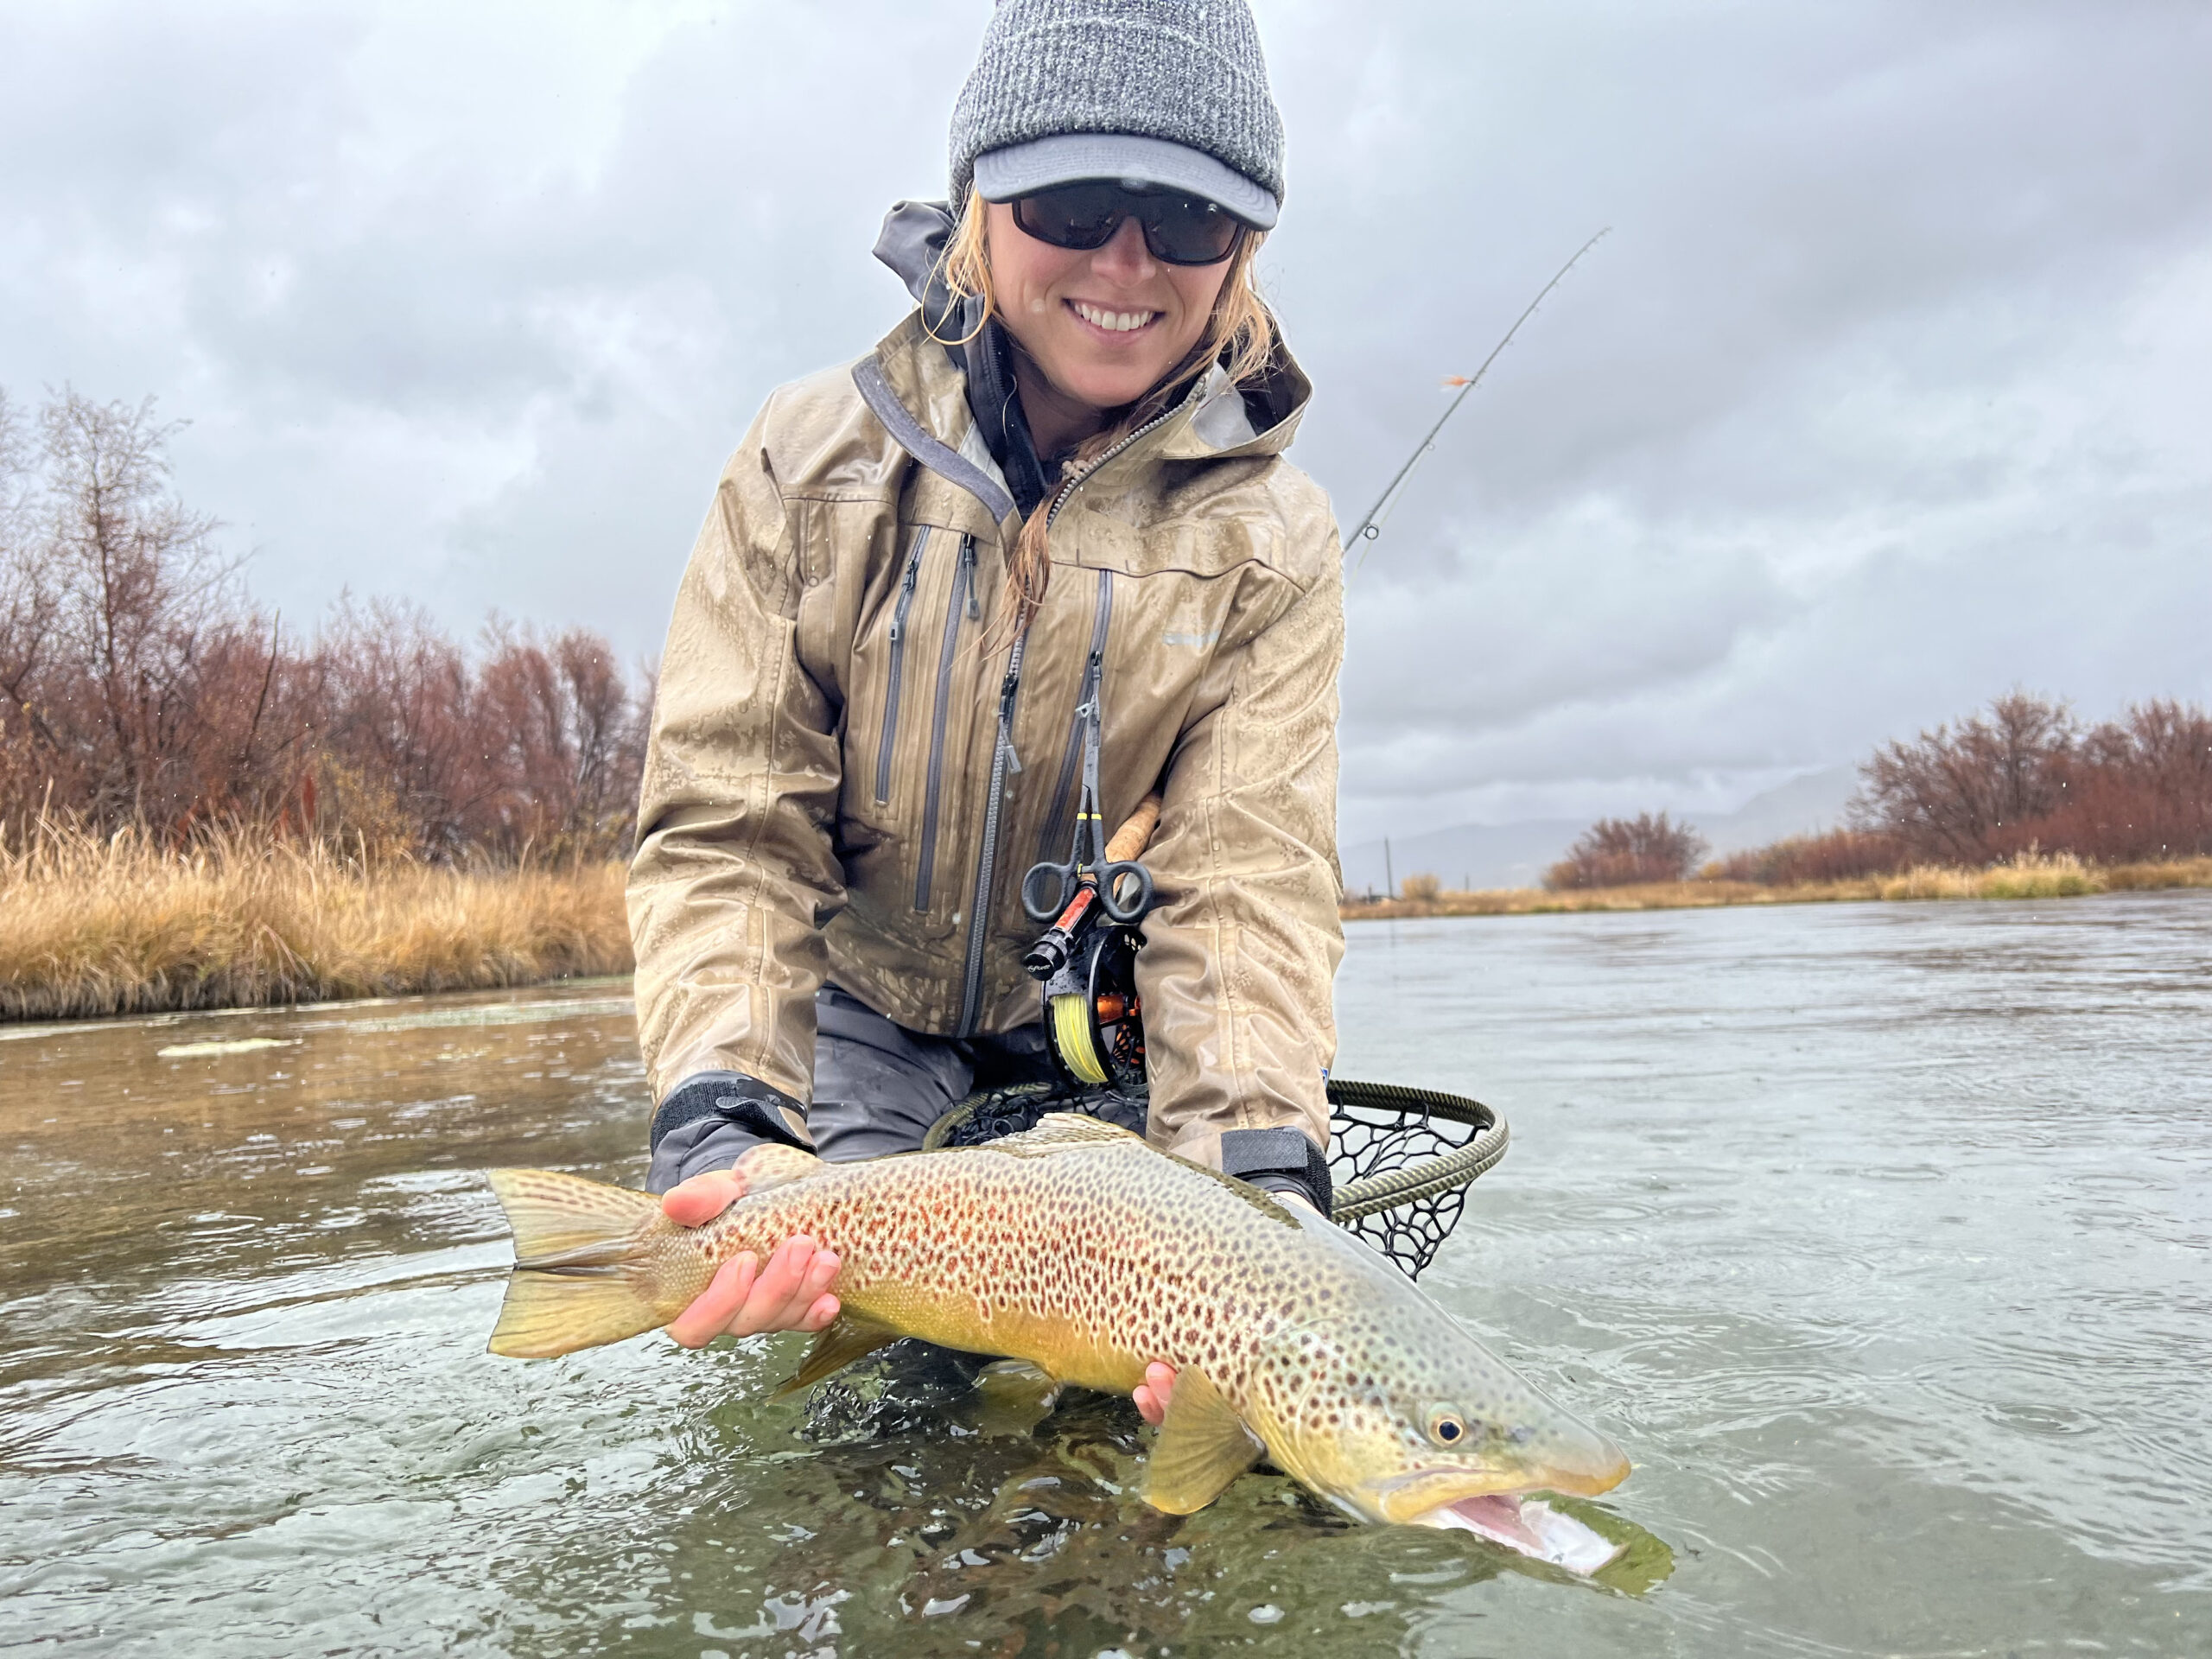 Female Angler holding up fish in the water with fall colors around